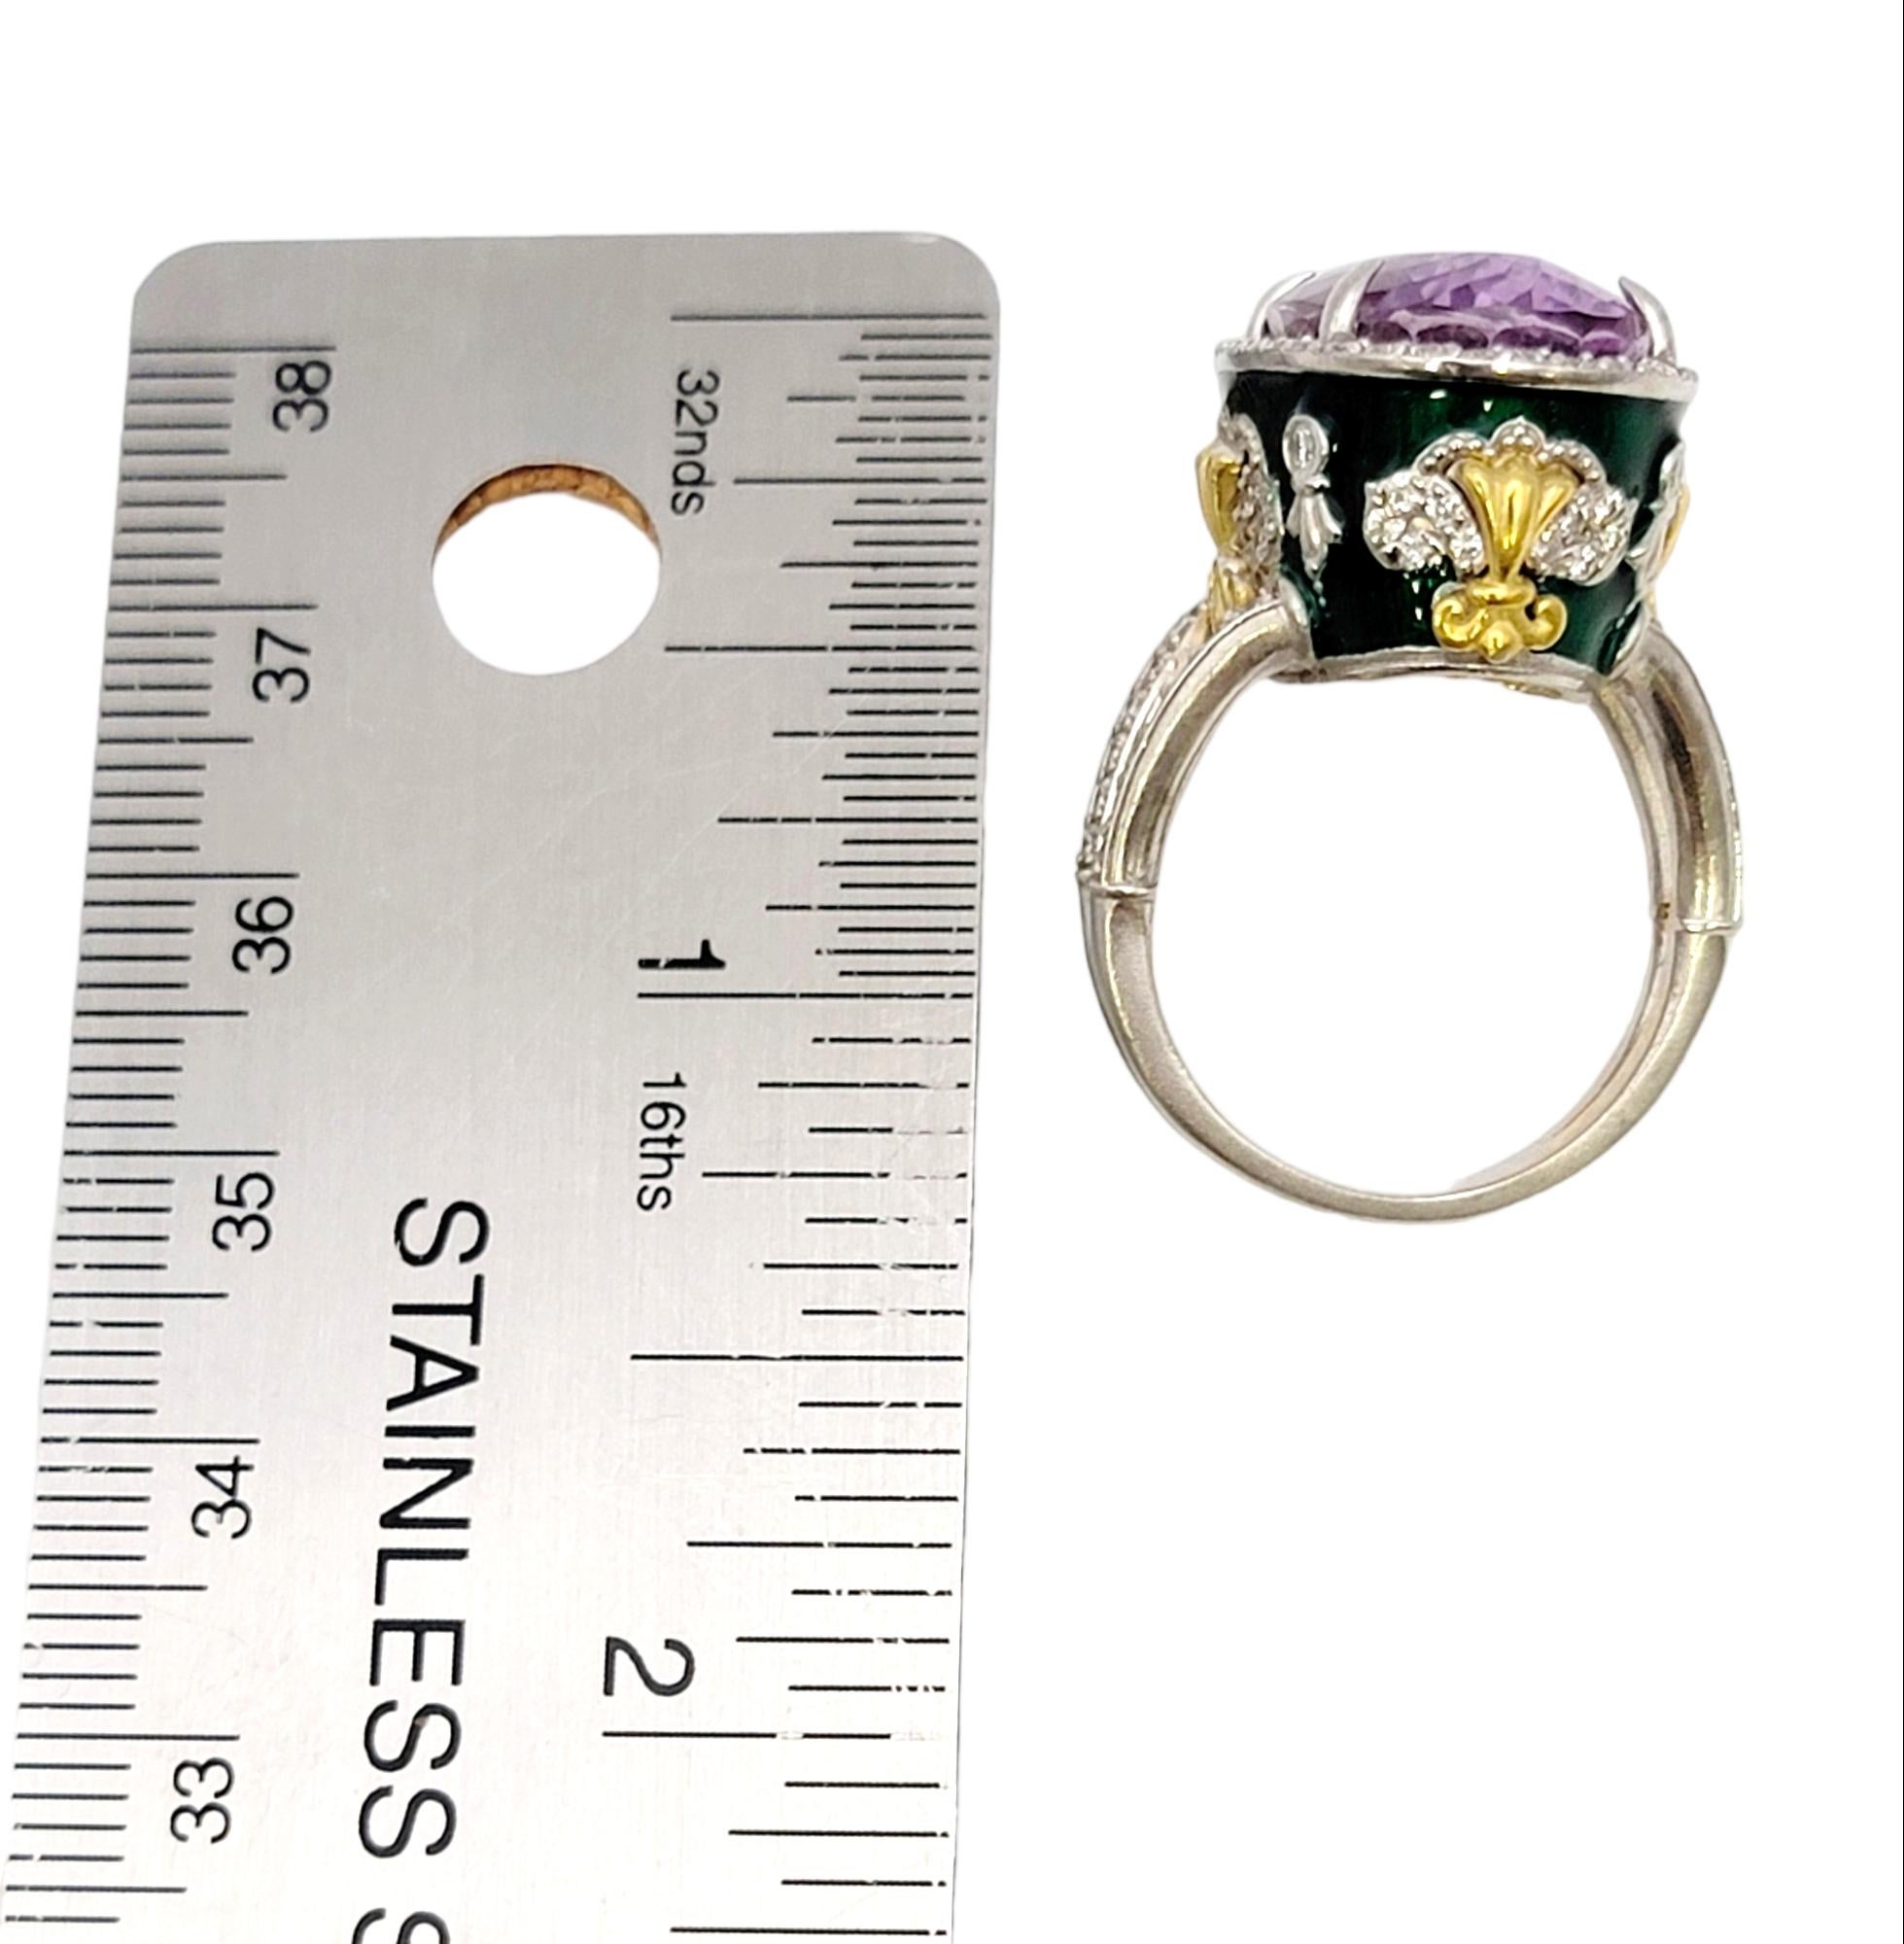 Stambolian Oval Kunzite with Diamond Halo and Green Enamel High Profile Ring 14